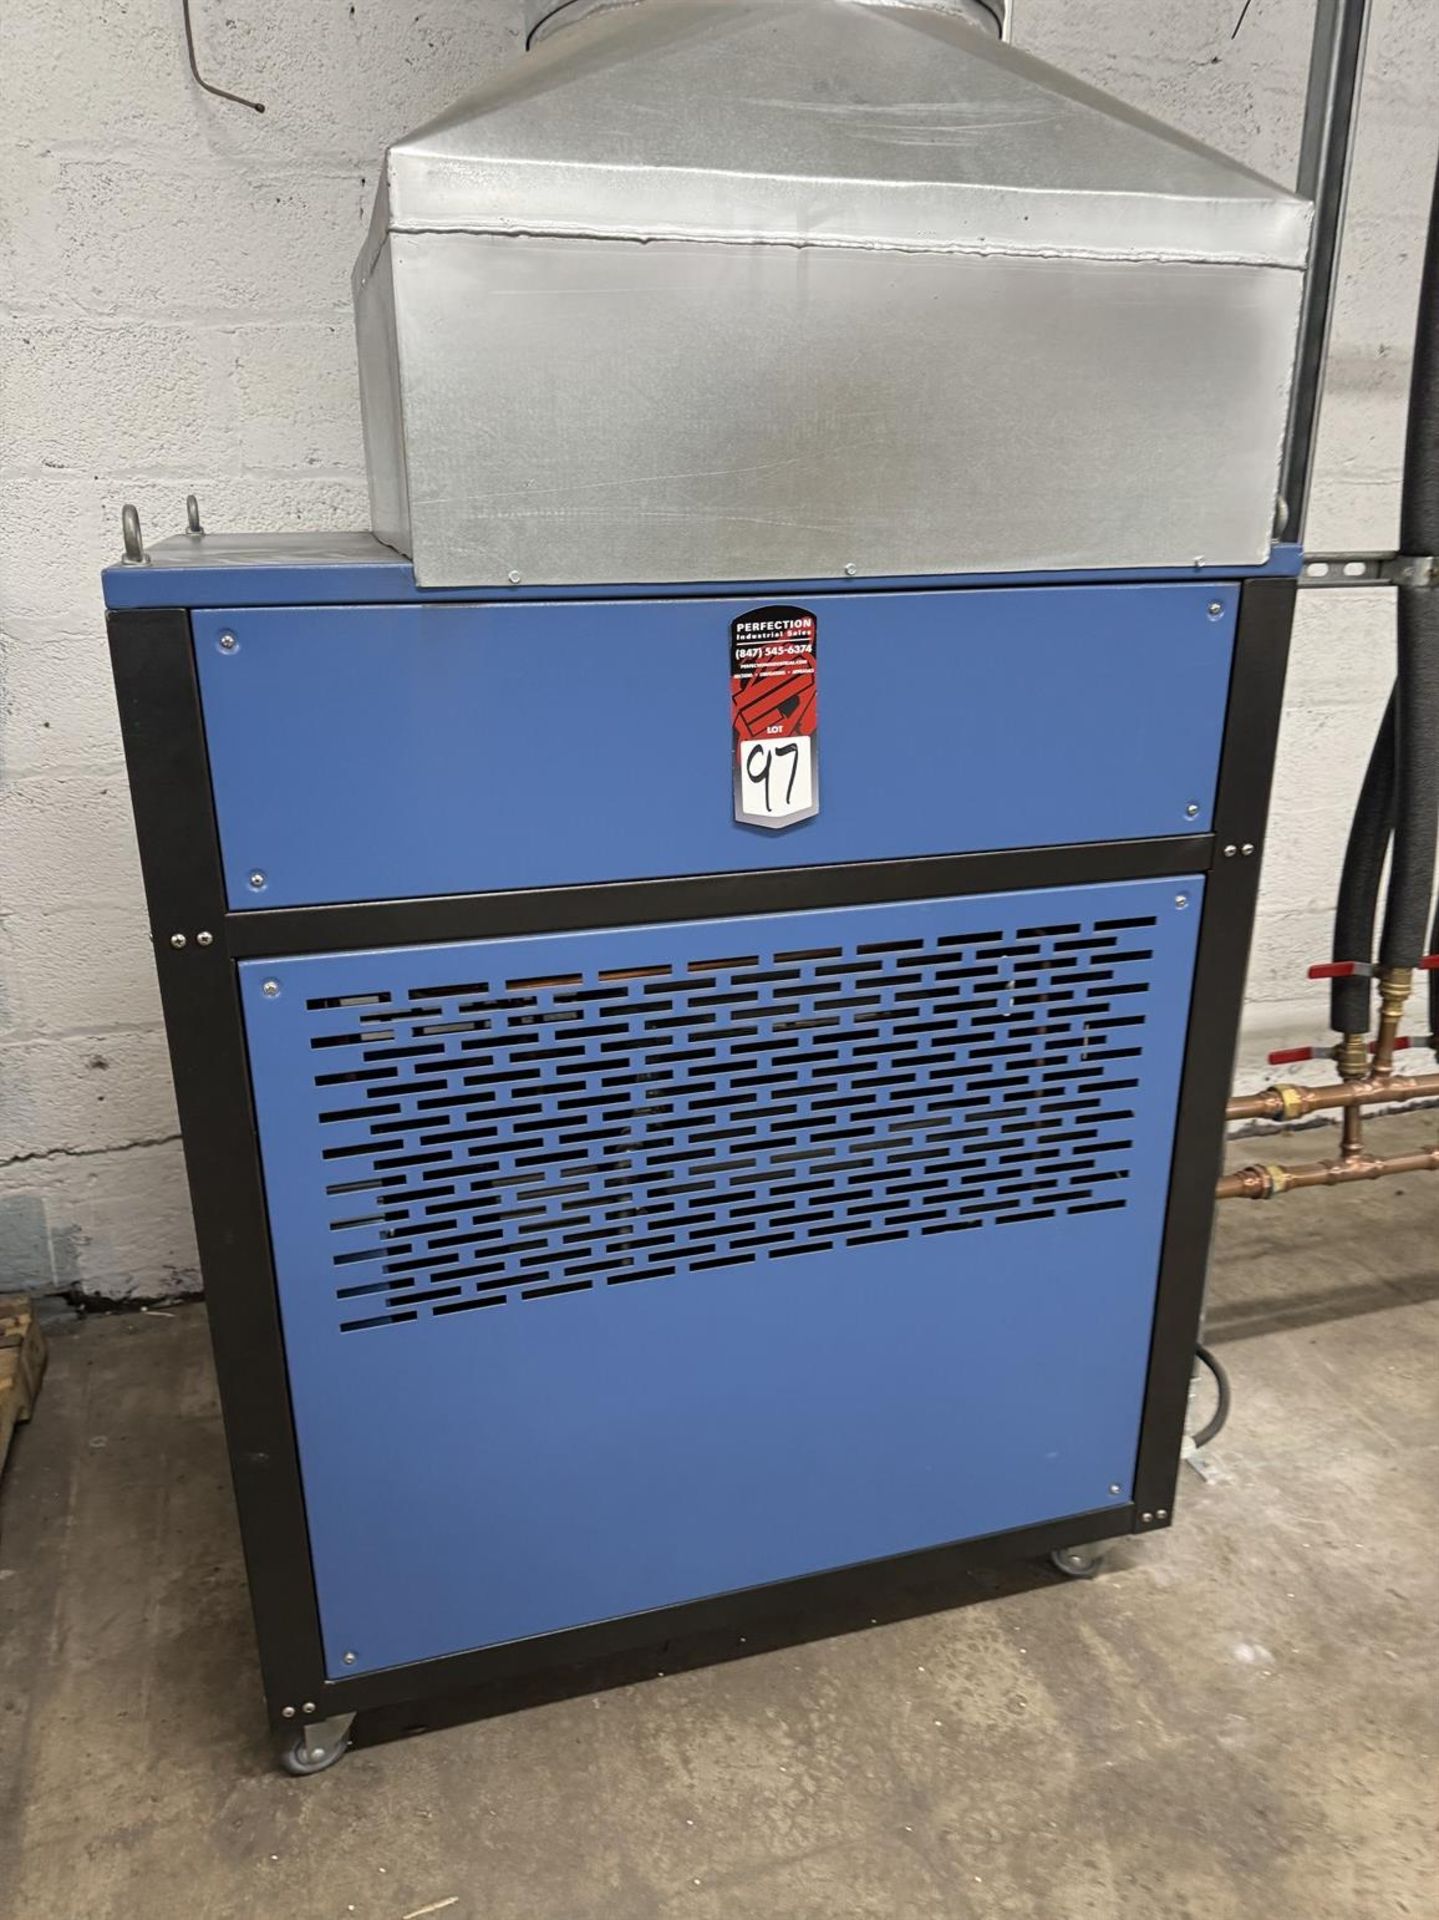 2019 PACIFIC RIM MACHNERY PRM-HC-05PACI 5Ton Chiller, s/n 2019AAFX0705 - Image 2 of 6